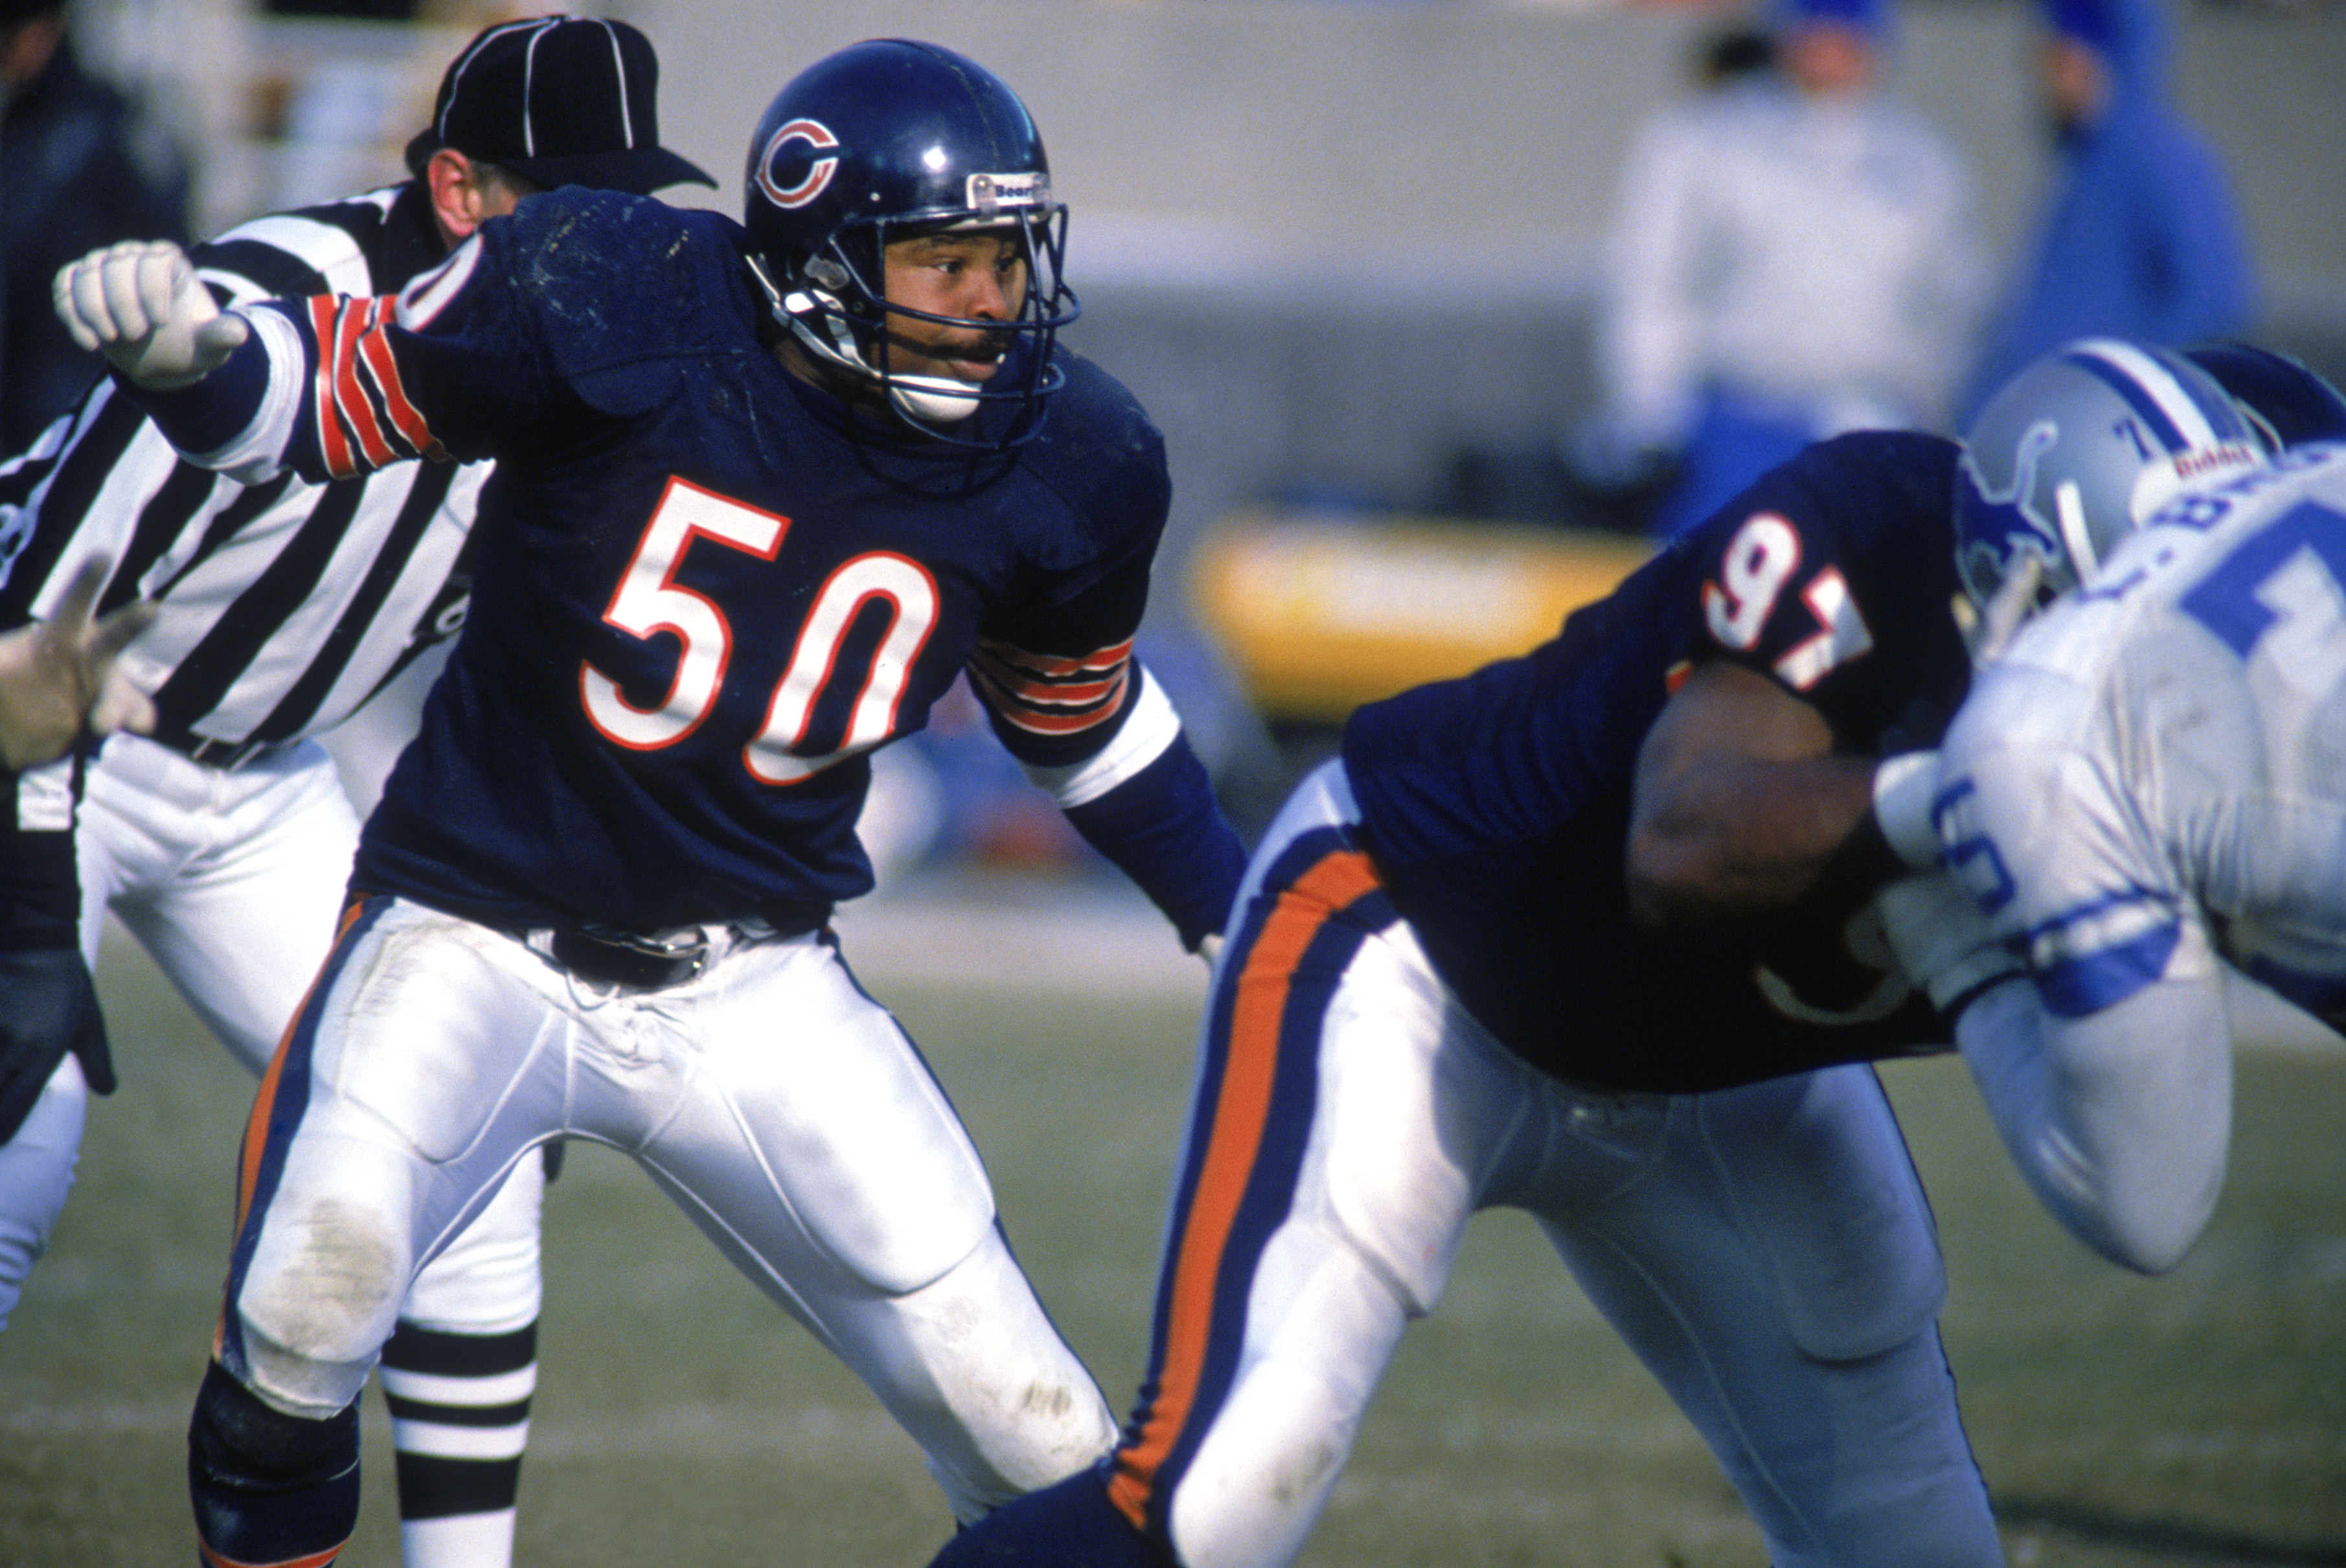 CHICAGO - 1988:  Linebacker Mike Singletary #50 of the Chicago Bears reacts in a play against Detroit Lions during a 1988 NFL season game at Soldier Field Stadium in Chicago, Illinois.  (Photo by Jonathan Daniel/Getty Images)